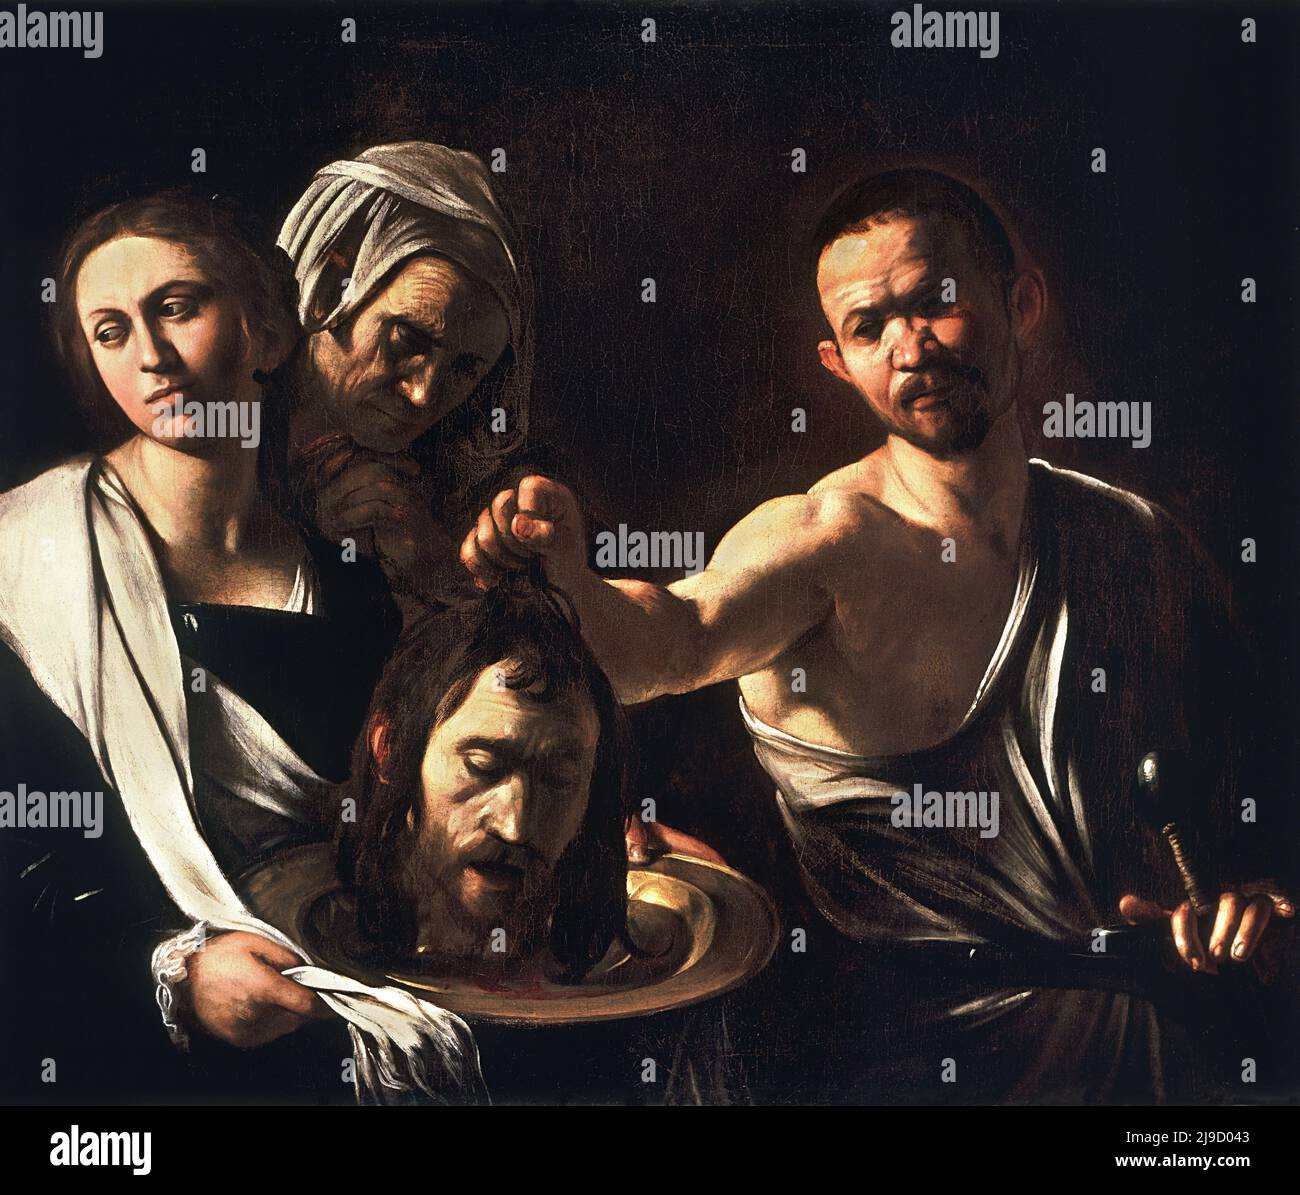 Salome with the head of John the Baptist painted by Caravaggio Stock Photo